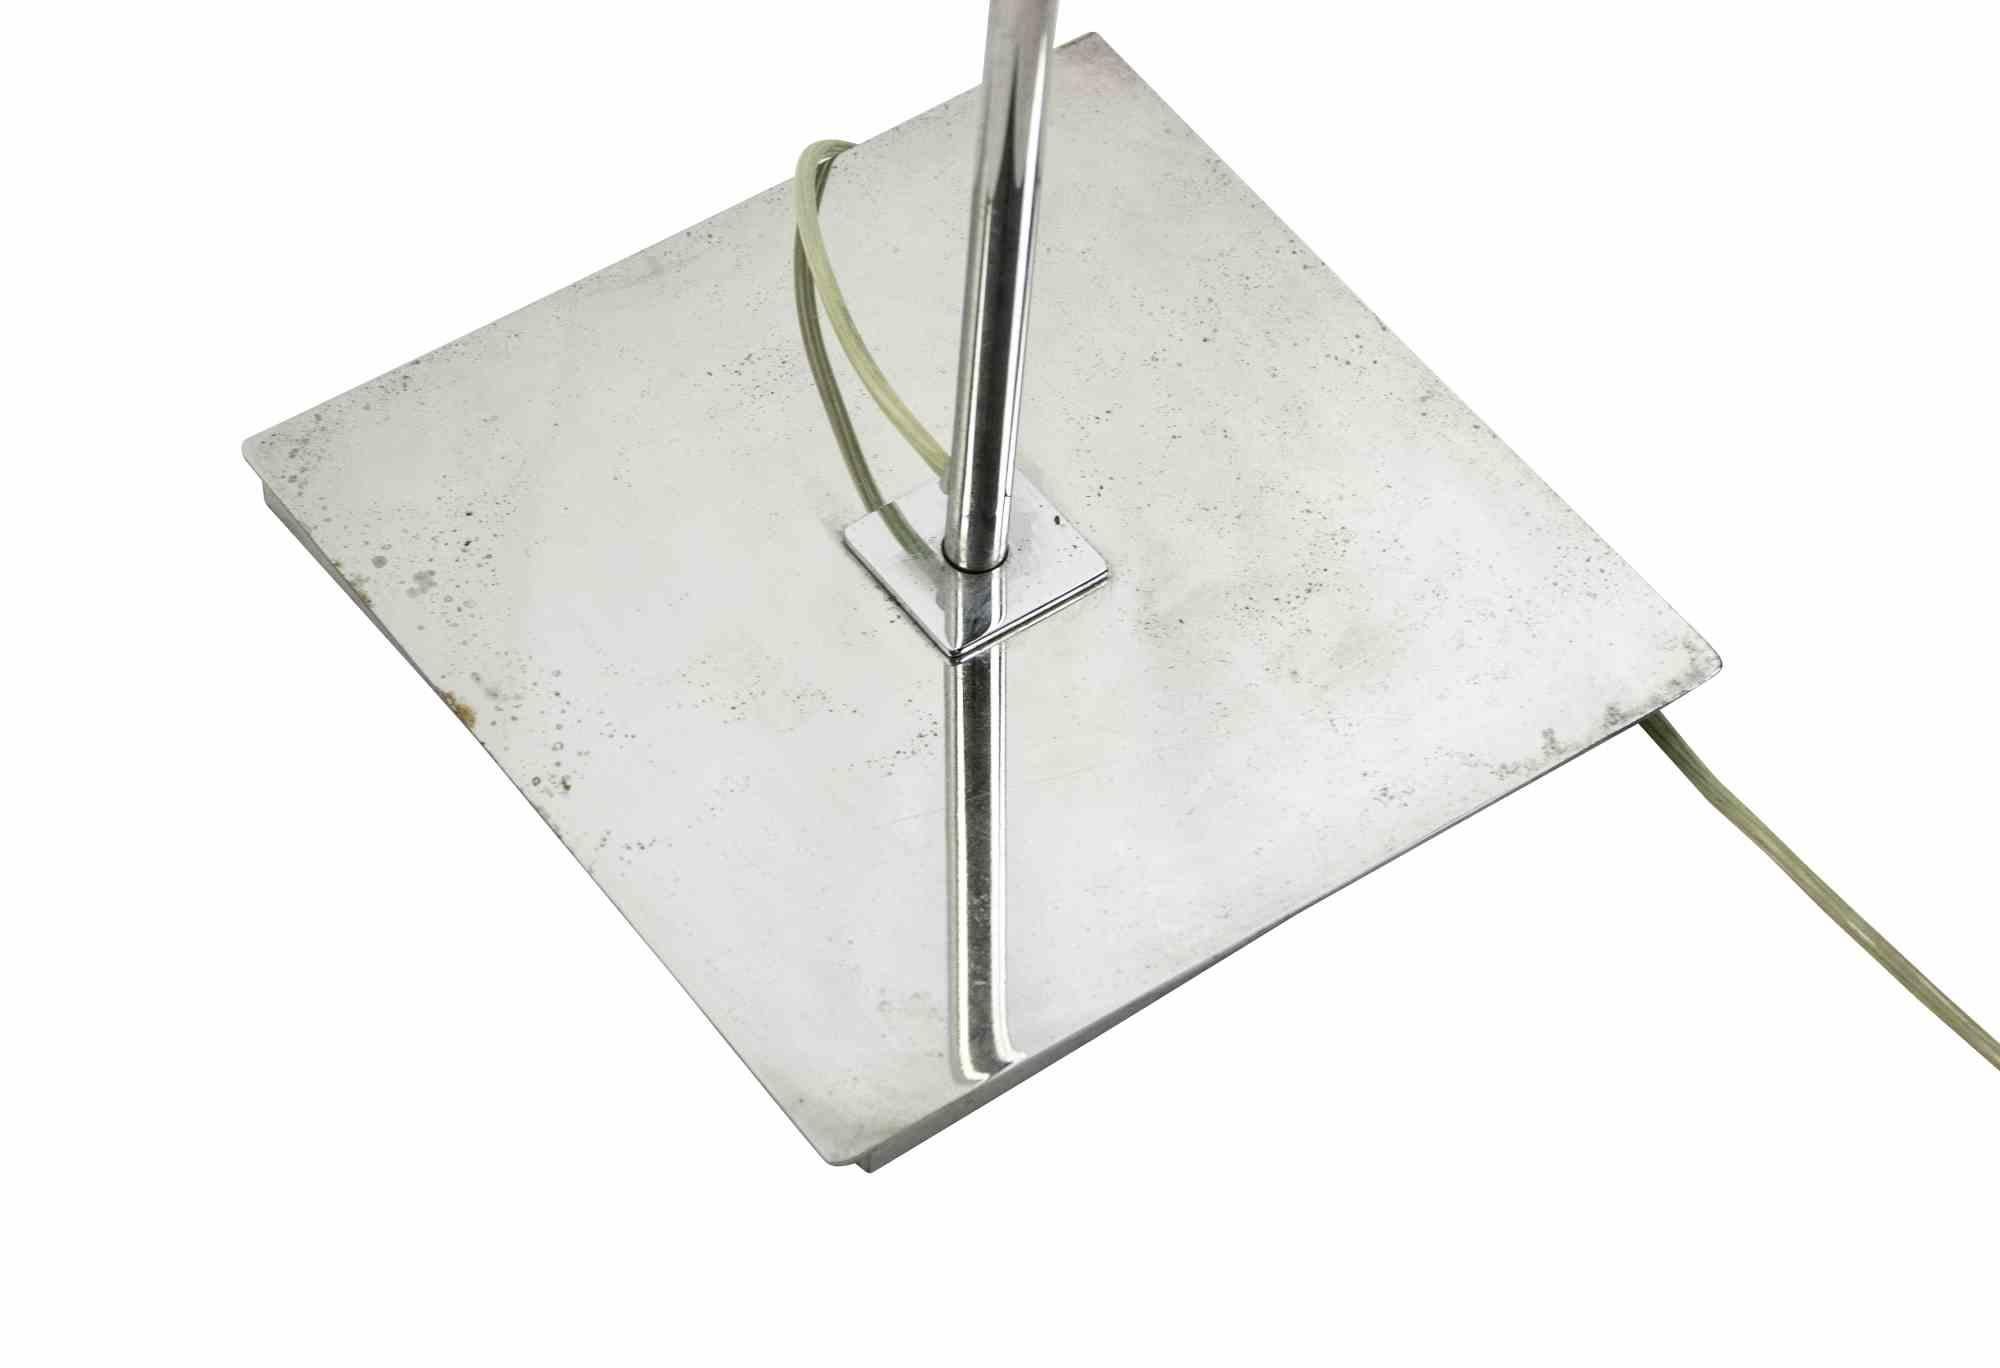 Favel chromed floor lamp is an original lamp realized for Favel in the 1970s

Square chromed steel bas.

Mint conditions (lack of chrome plating).

Favel is a company that creates lighting fixtures for the whole house aiming at a light that